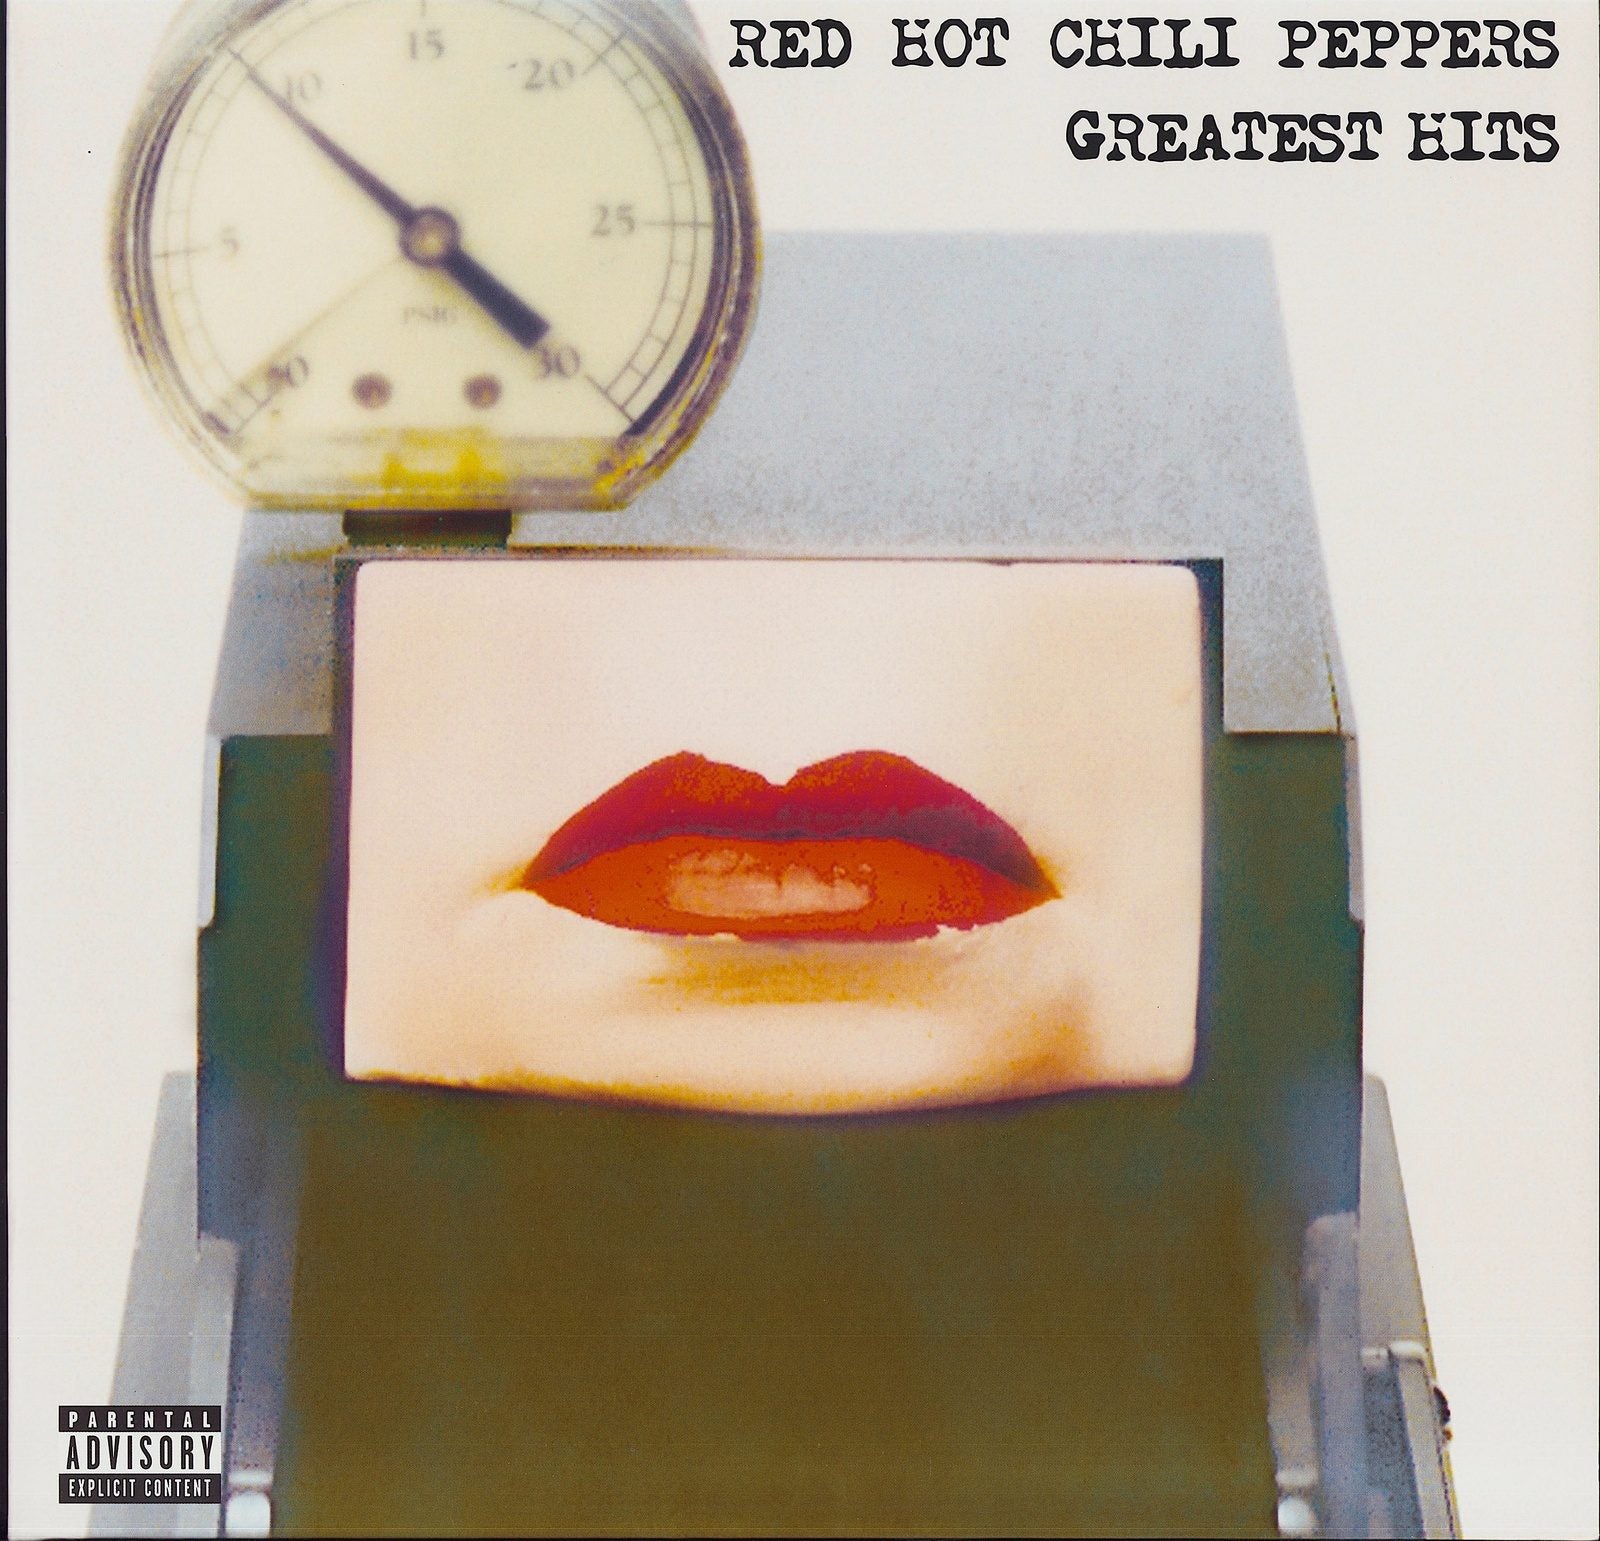 Red Hot Chili Peppers ‎- Greatest Hits (Vinyl 2LP)